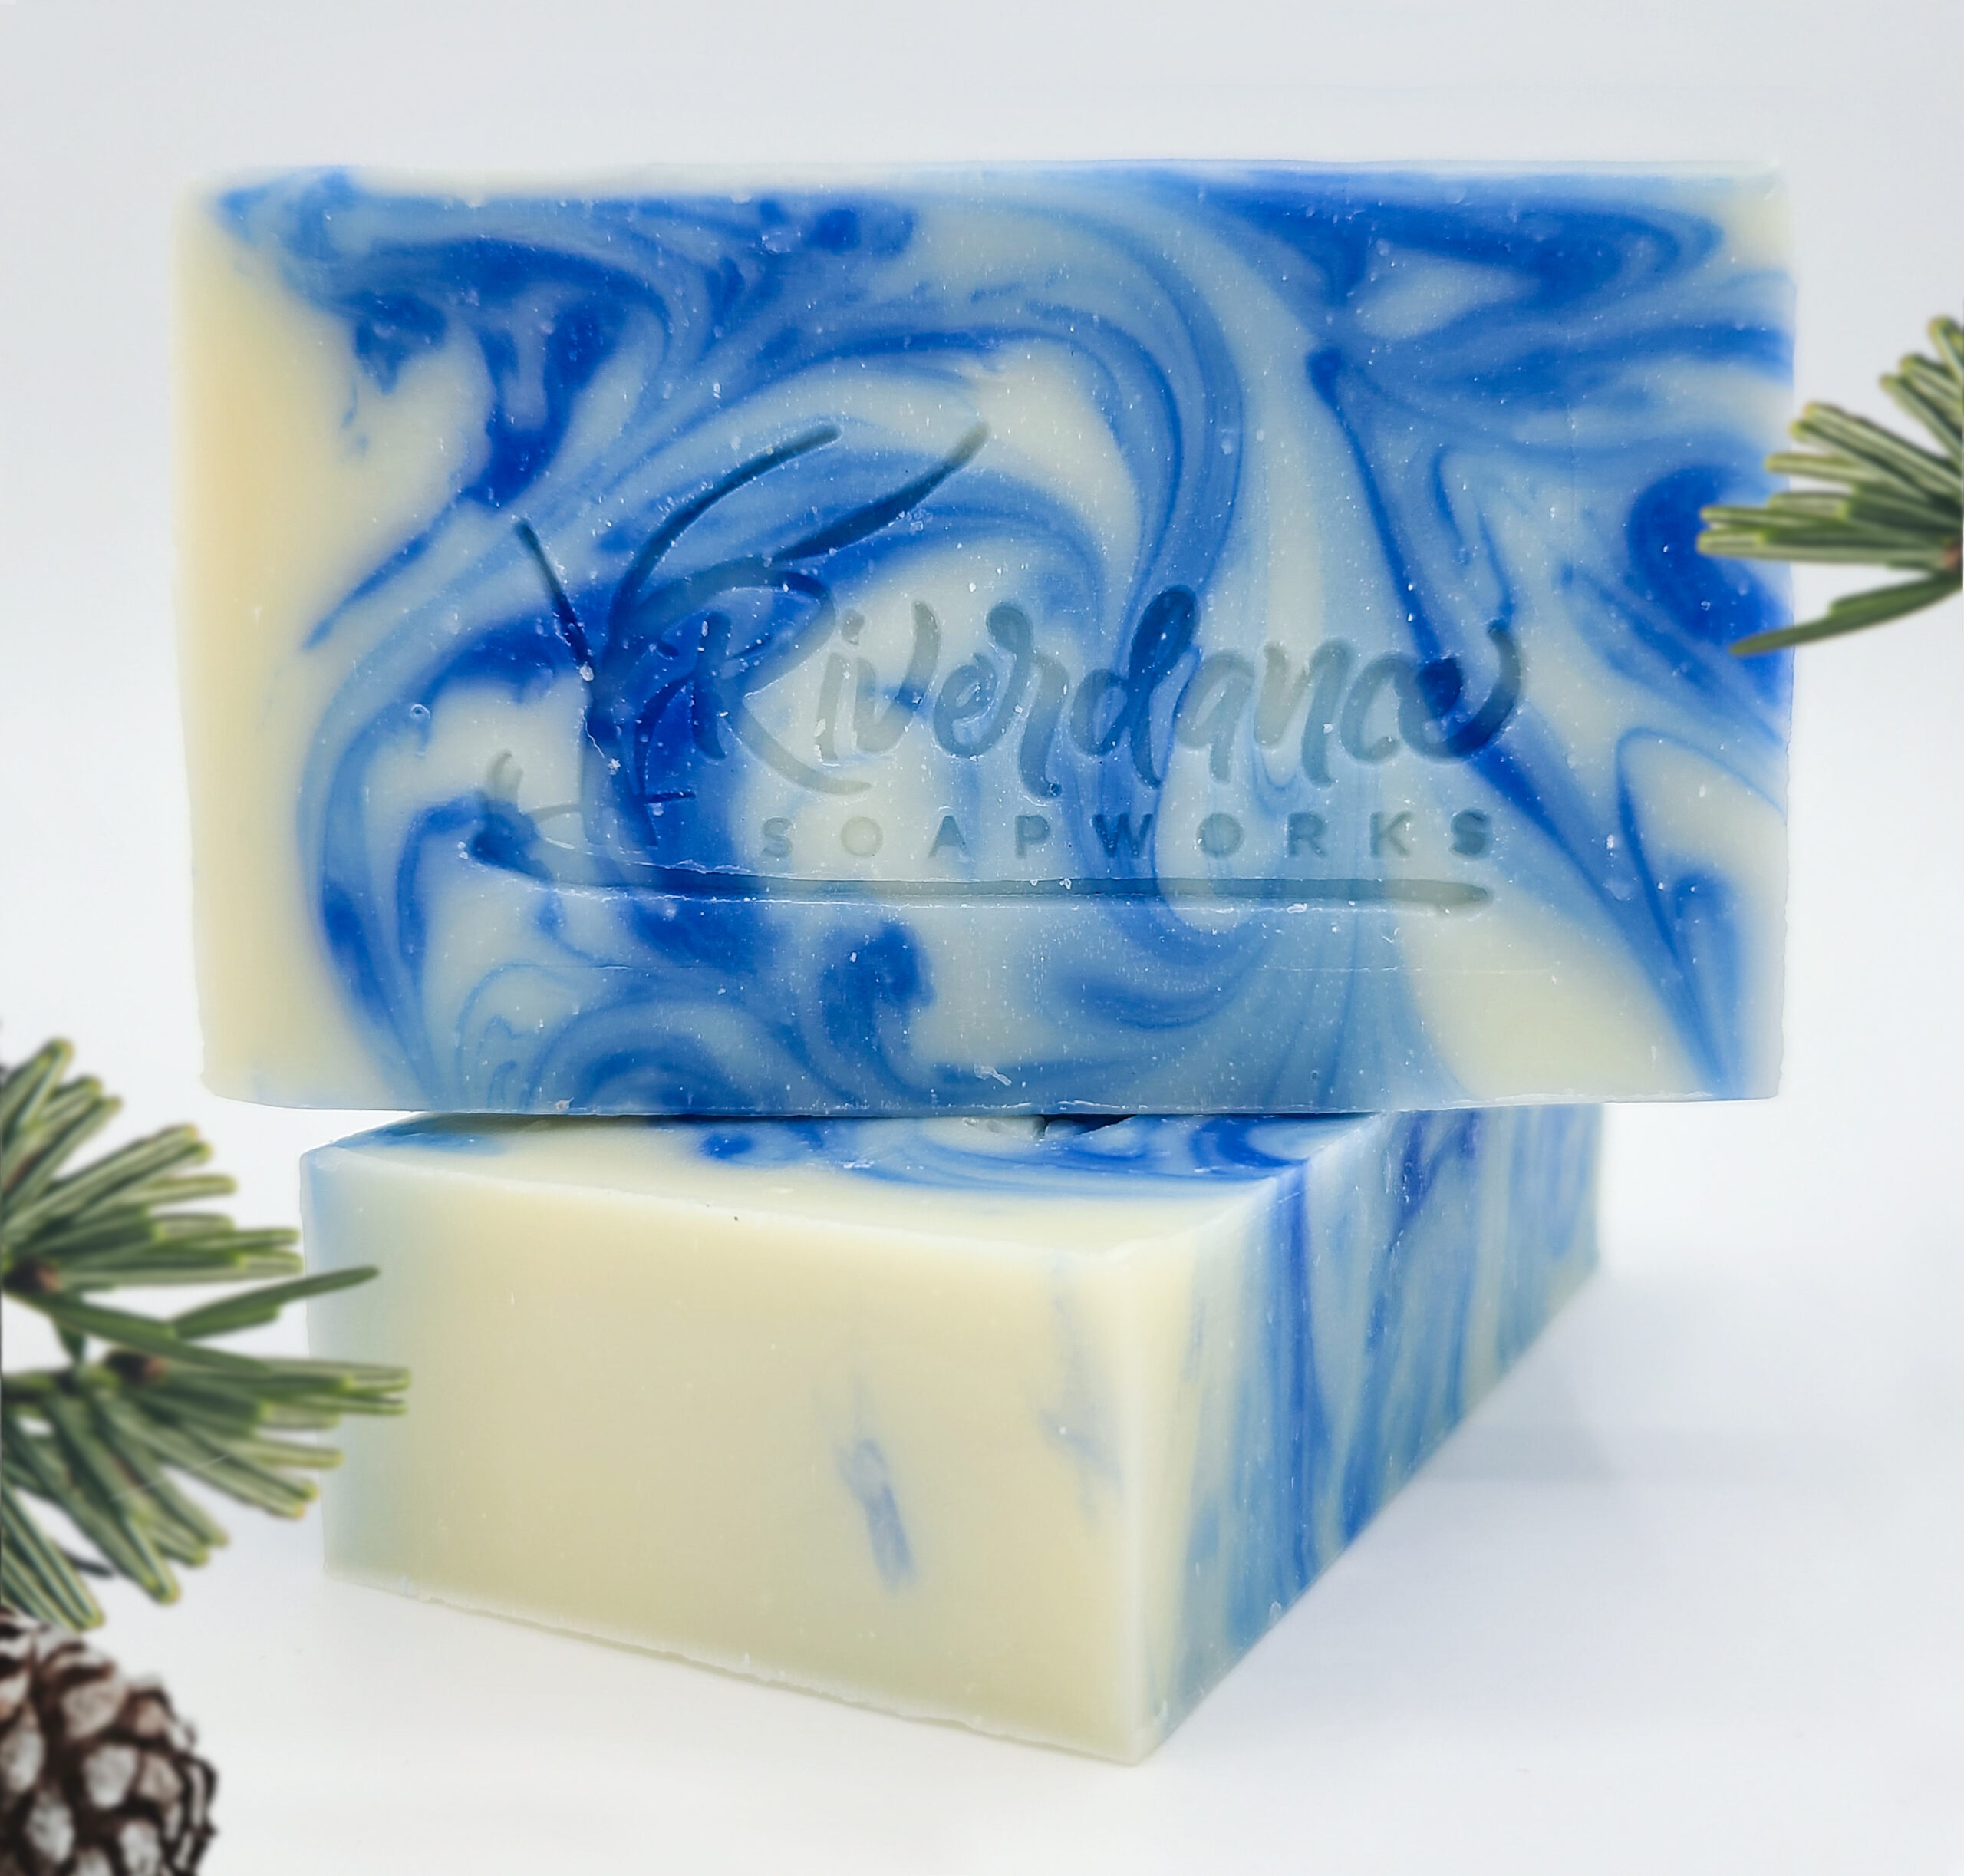 Olympic Mist Soap product image